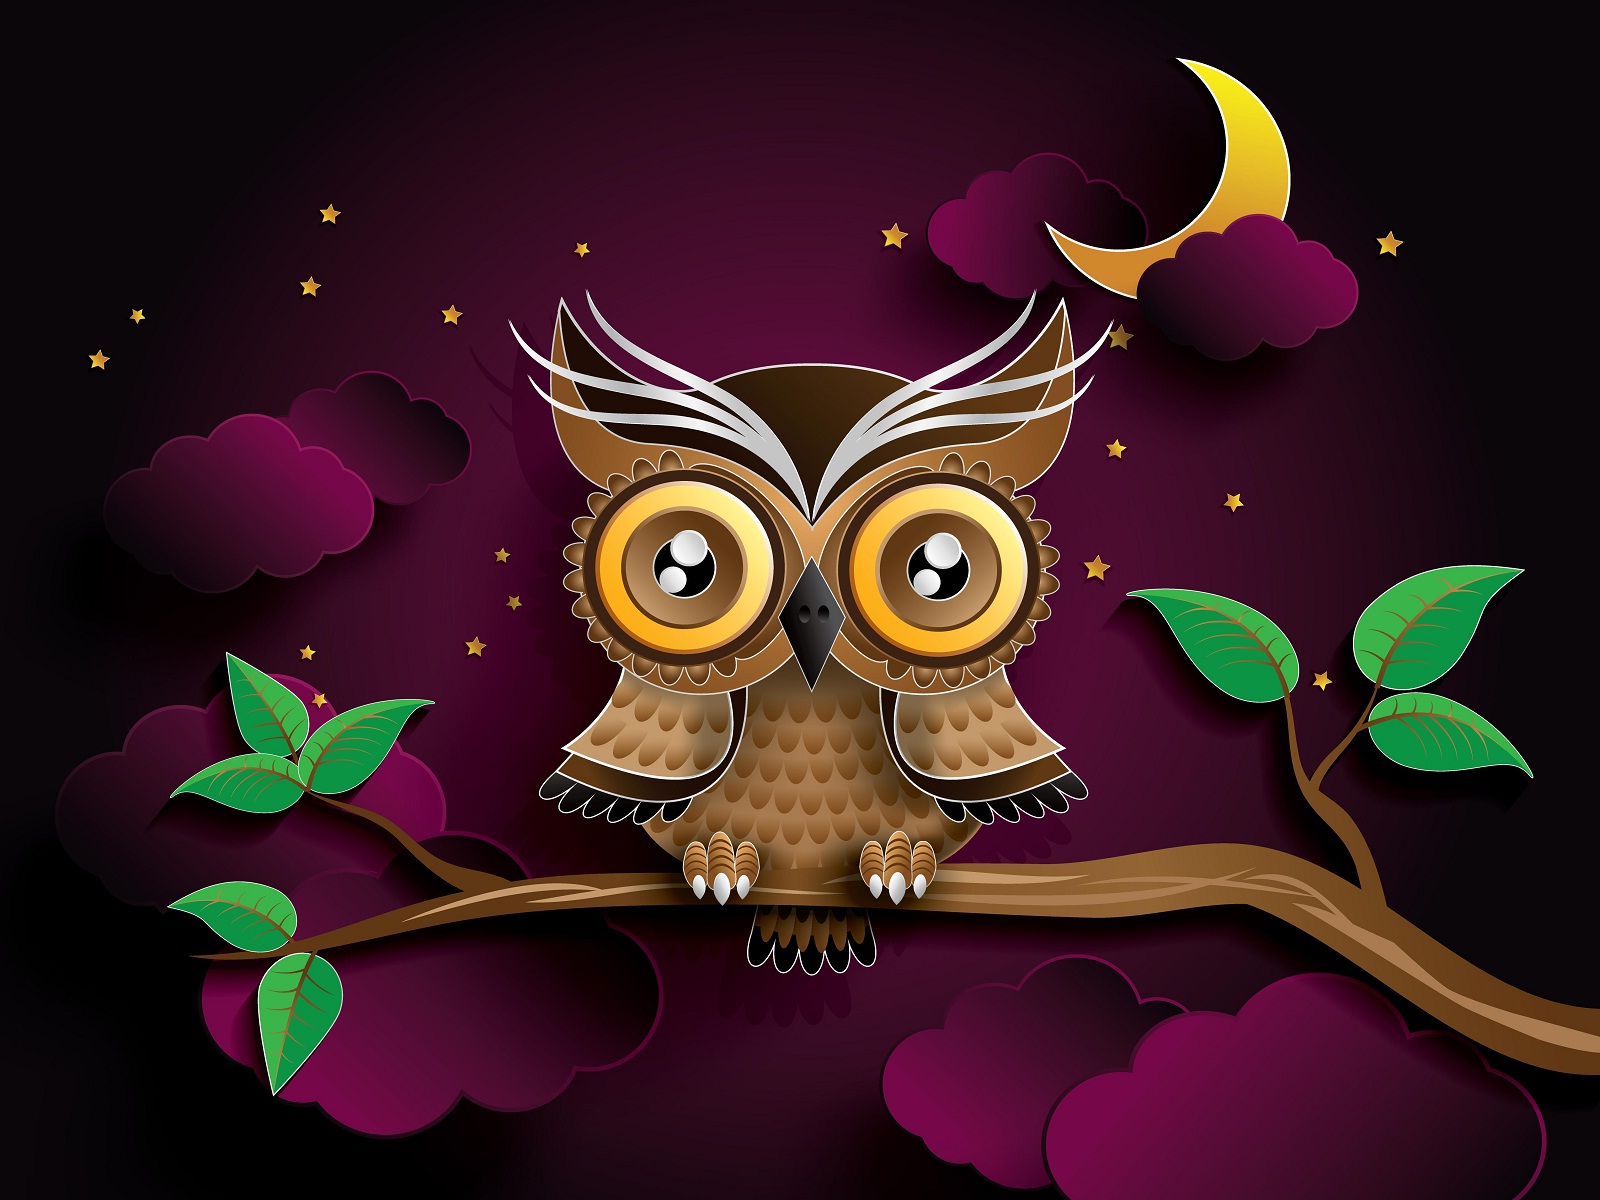 Owl Tumblr Wallpaper For Android For Free Wallpaper - HD Wallpaper 